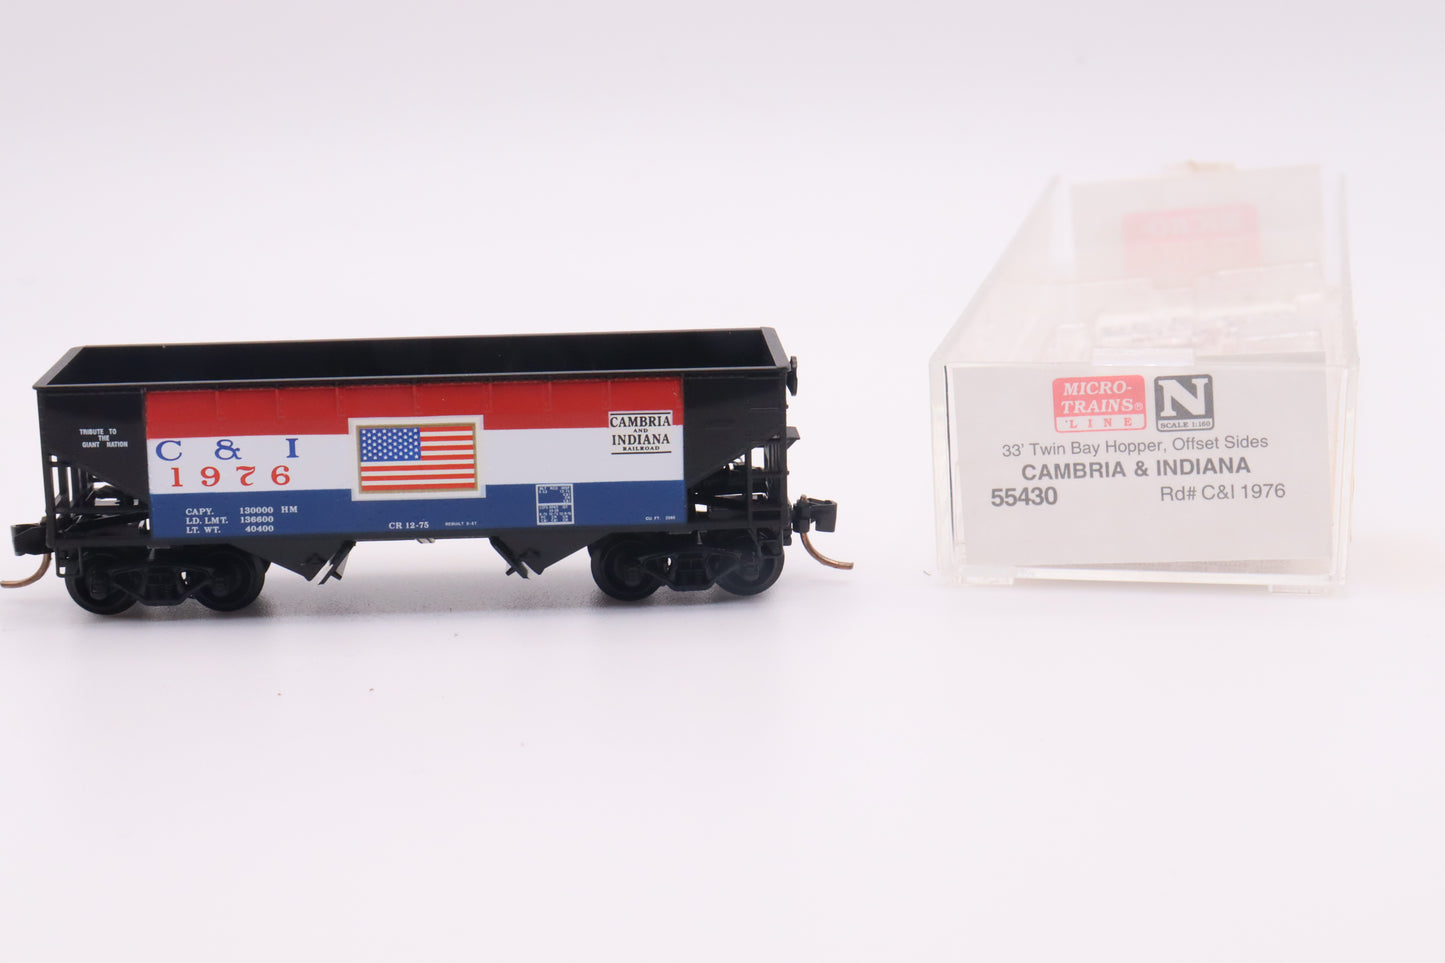 MTL-55430 - 33' Twin Bay Hopper, Offset Sides - Cambria & Indiana - C&I-1976